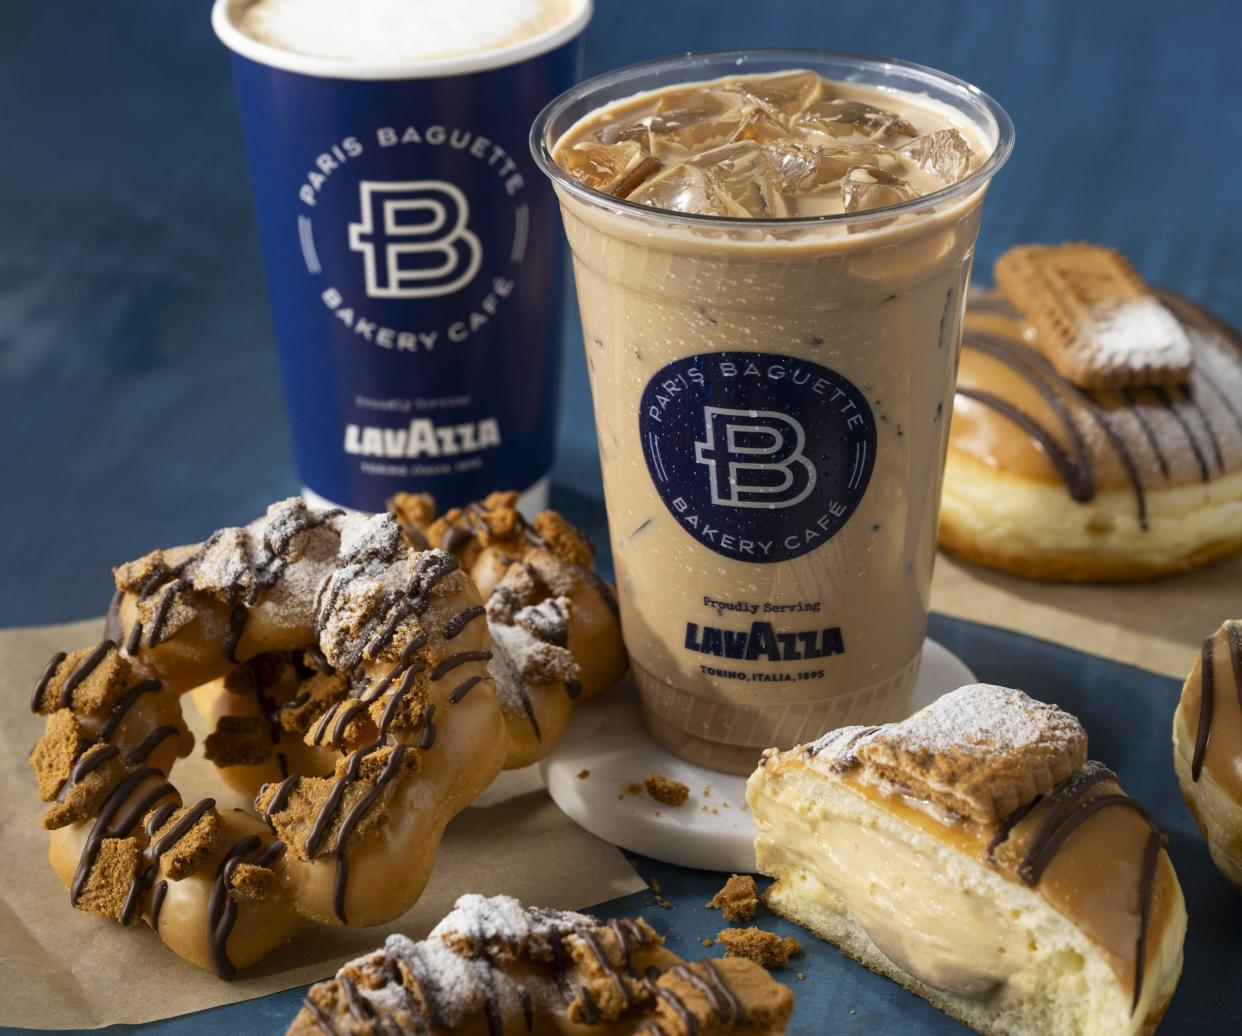 The international Paris Baguette café chain offers breads, pastries, sandwiches, specialty coffees and other popular items.